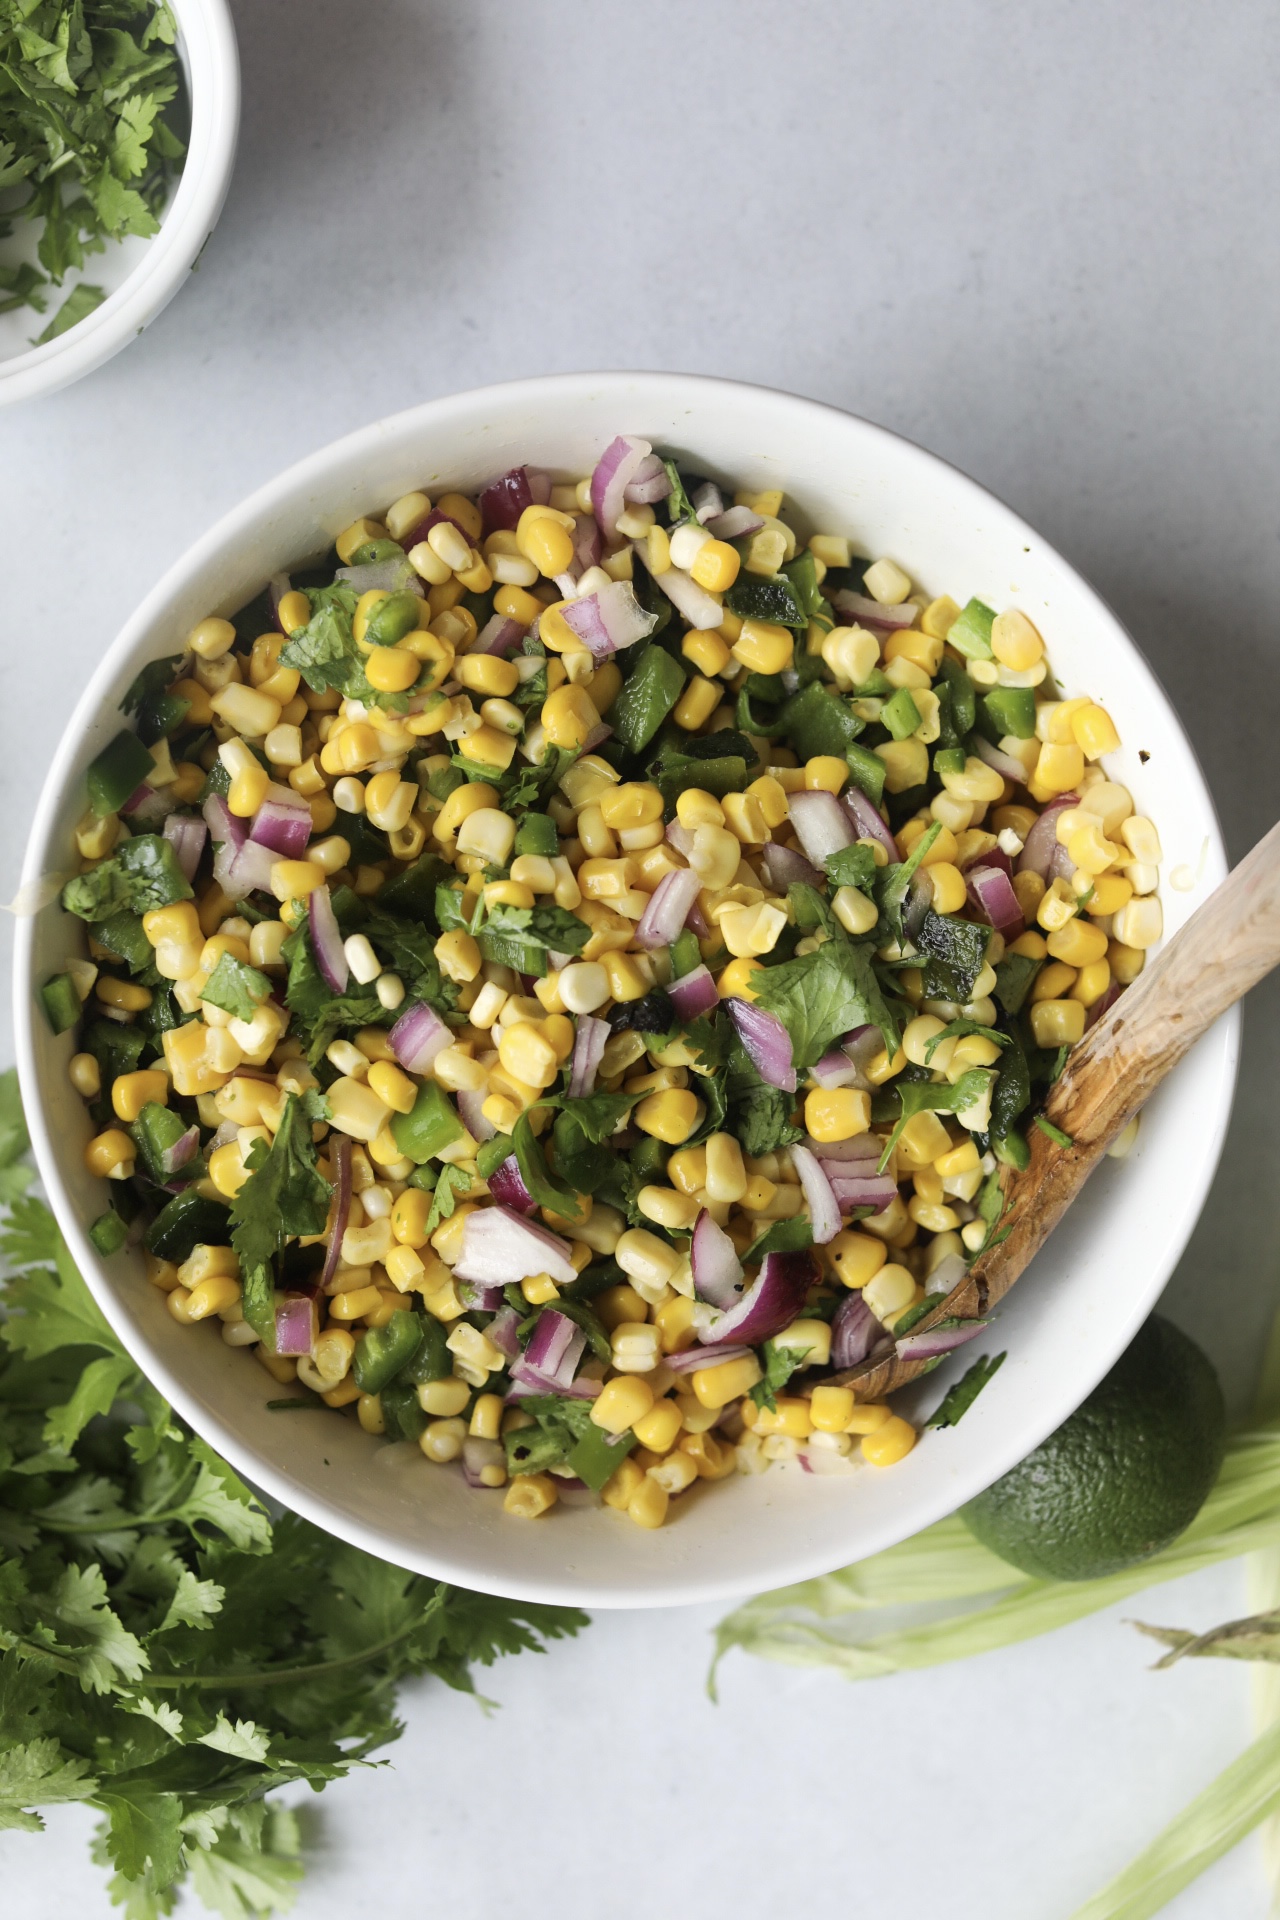 Corn salsa mixed in a white bowl with a wooden spoon.